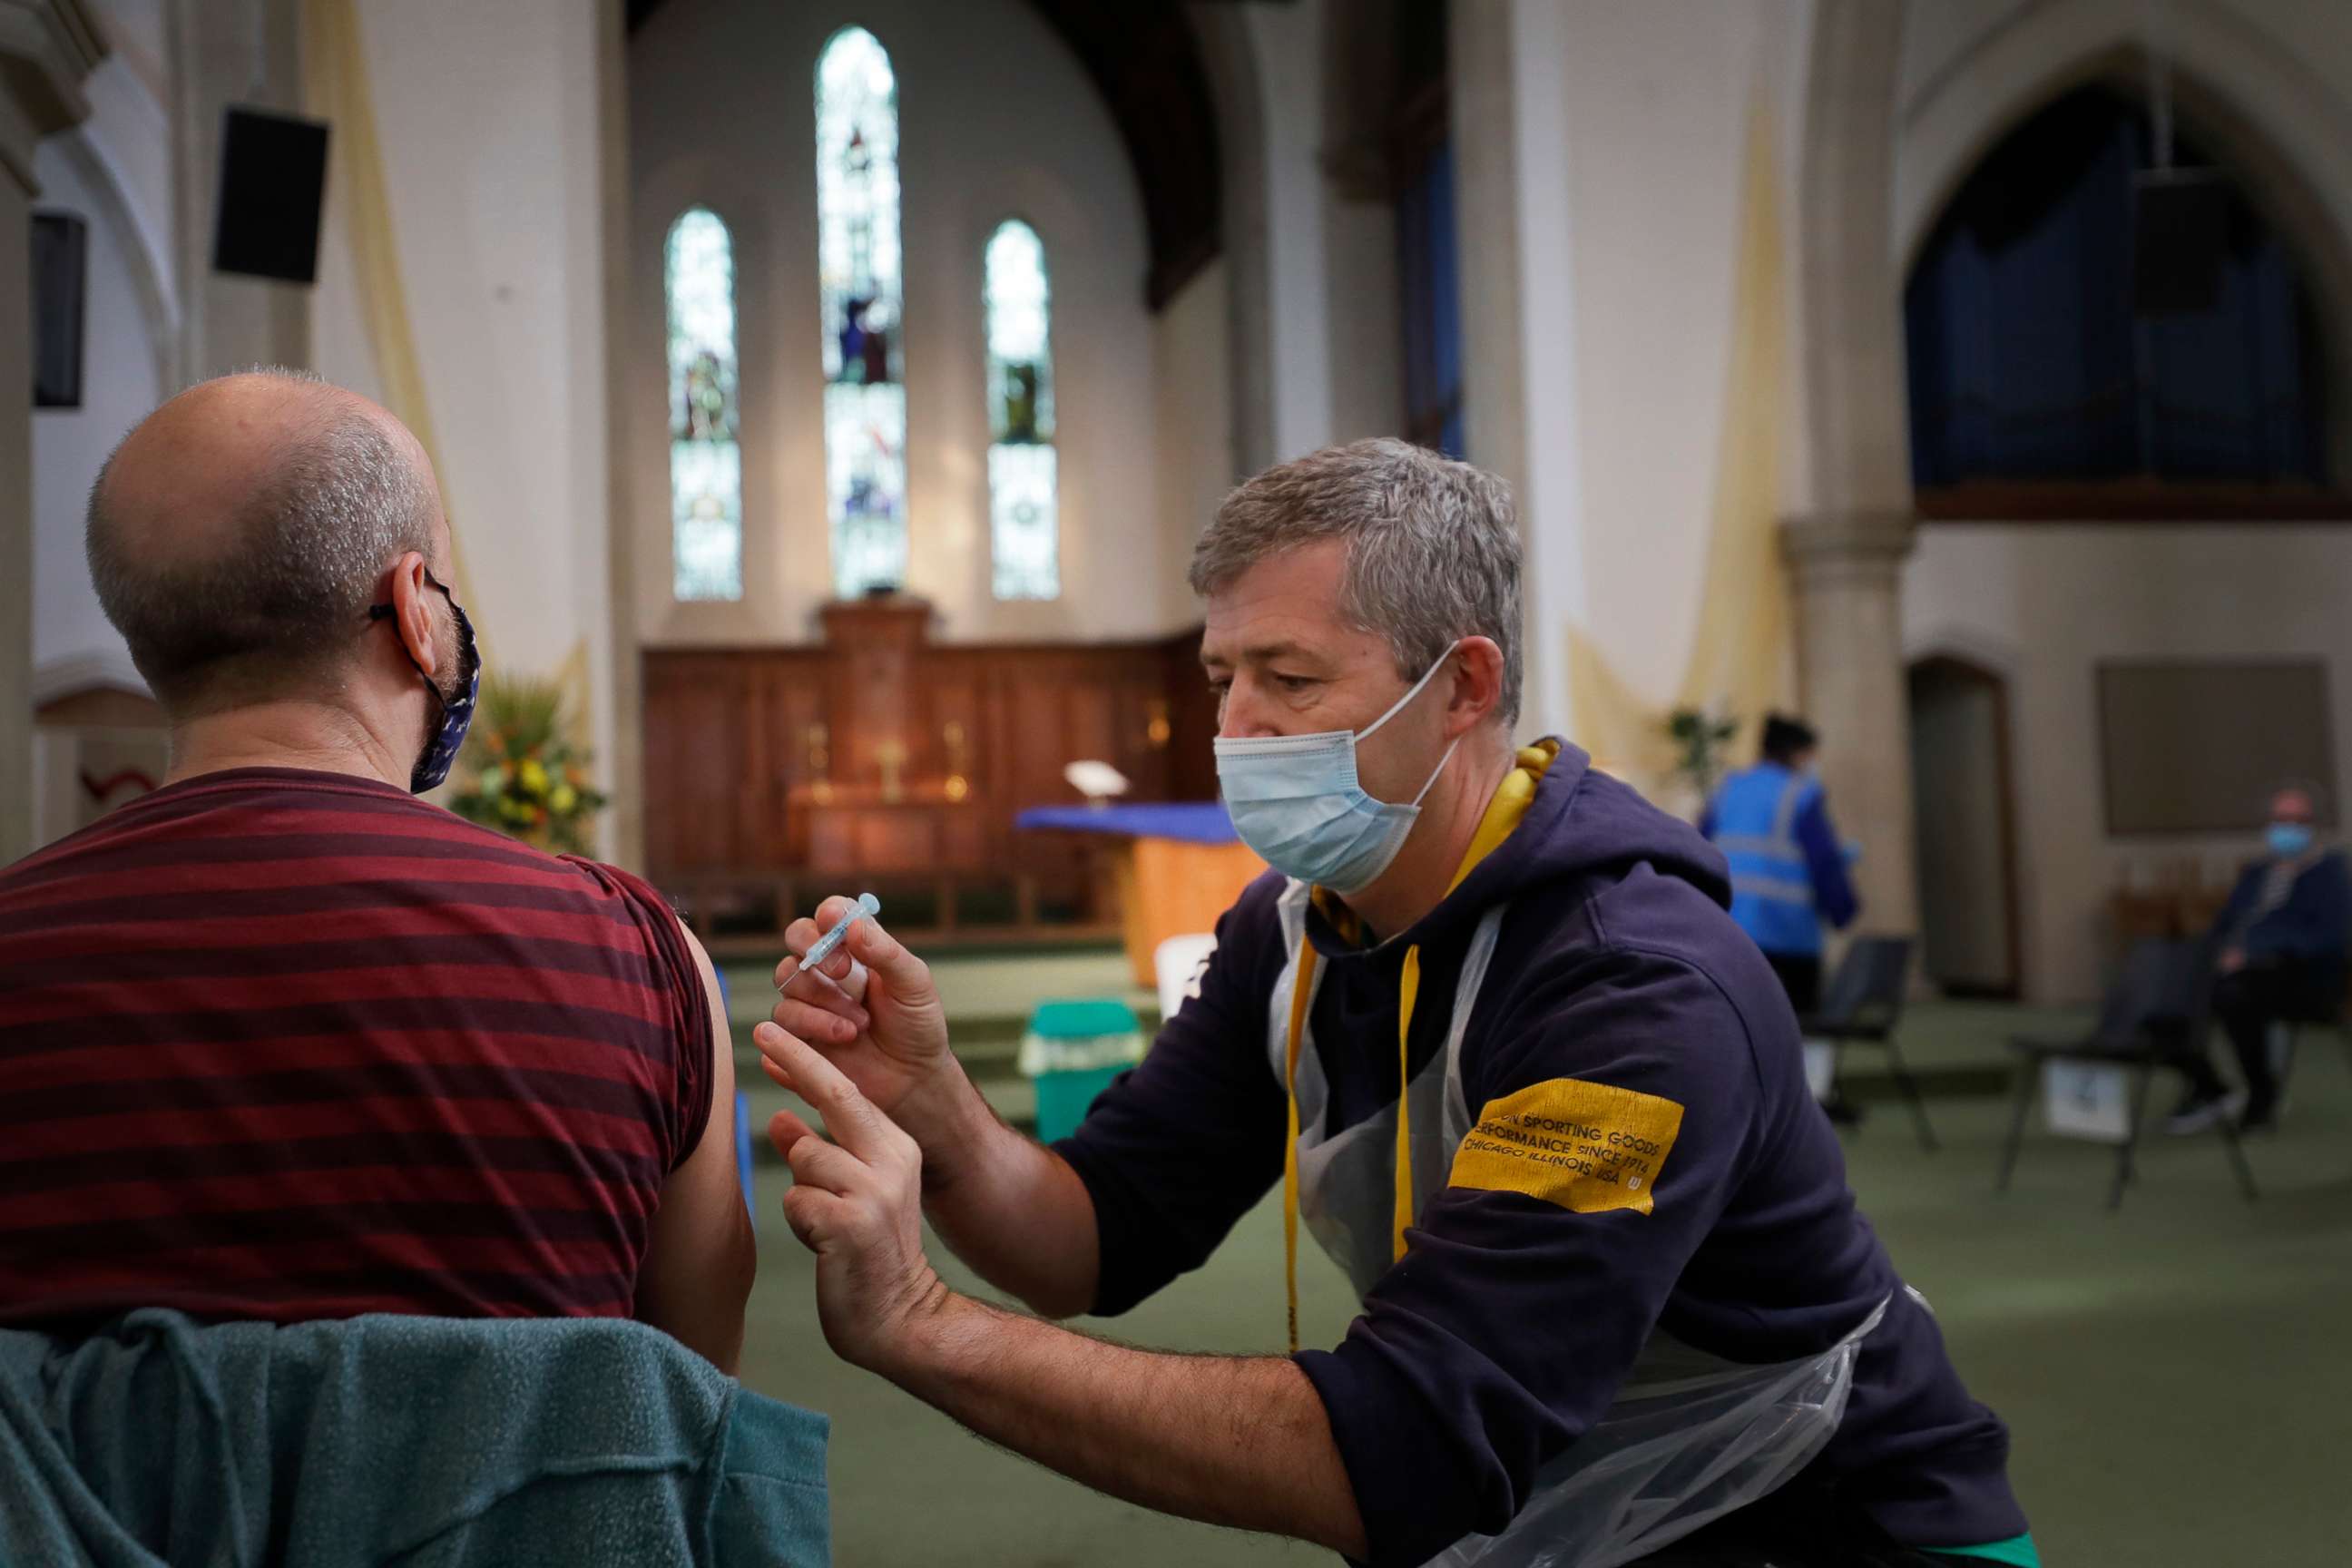 PHOTO: Nick Gray, a St Johns Ambulance vaccinator gives the AstraZeneca vaccine at St John's Church, in Ealing, London, March 16, 2021. 